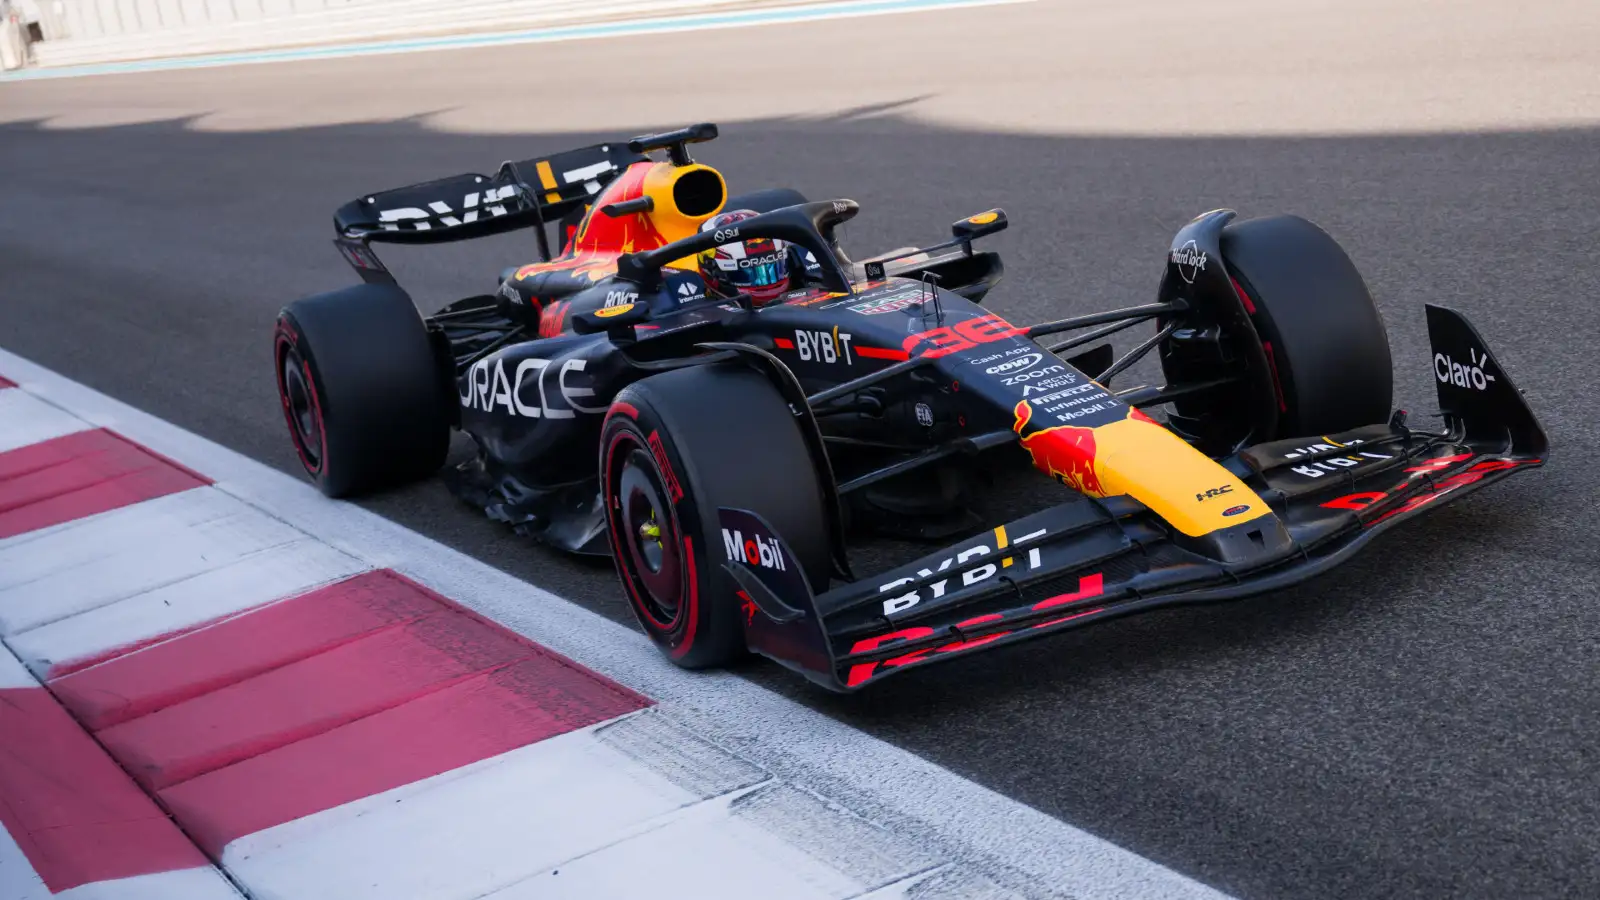 Jake Dennis, Formula E Champion, tests the Red Bull RB19 in Abu Dhabi.